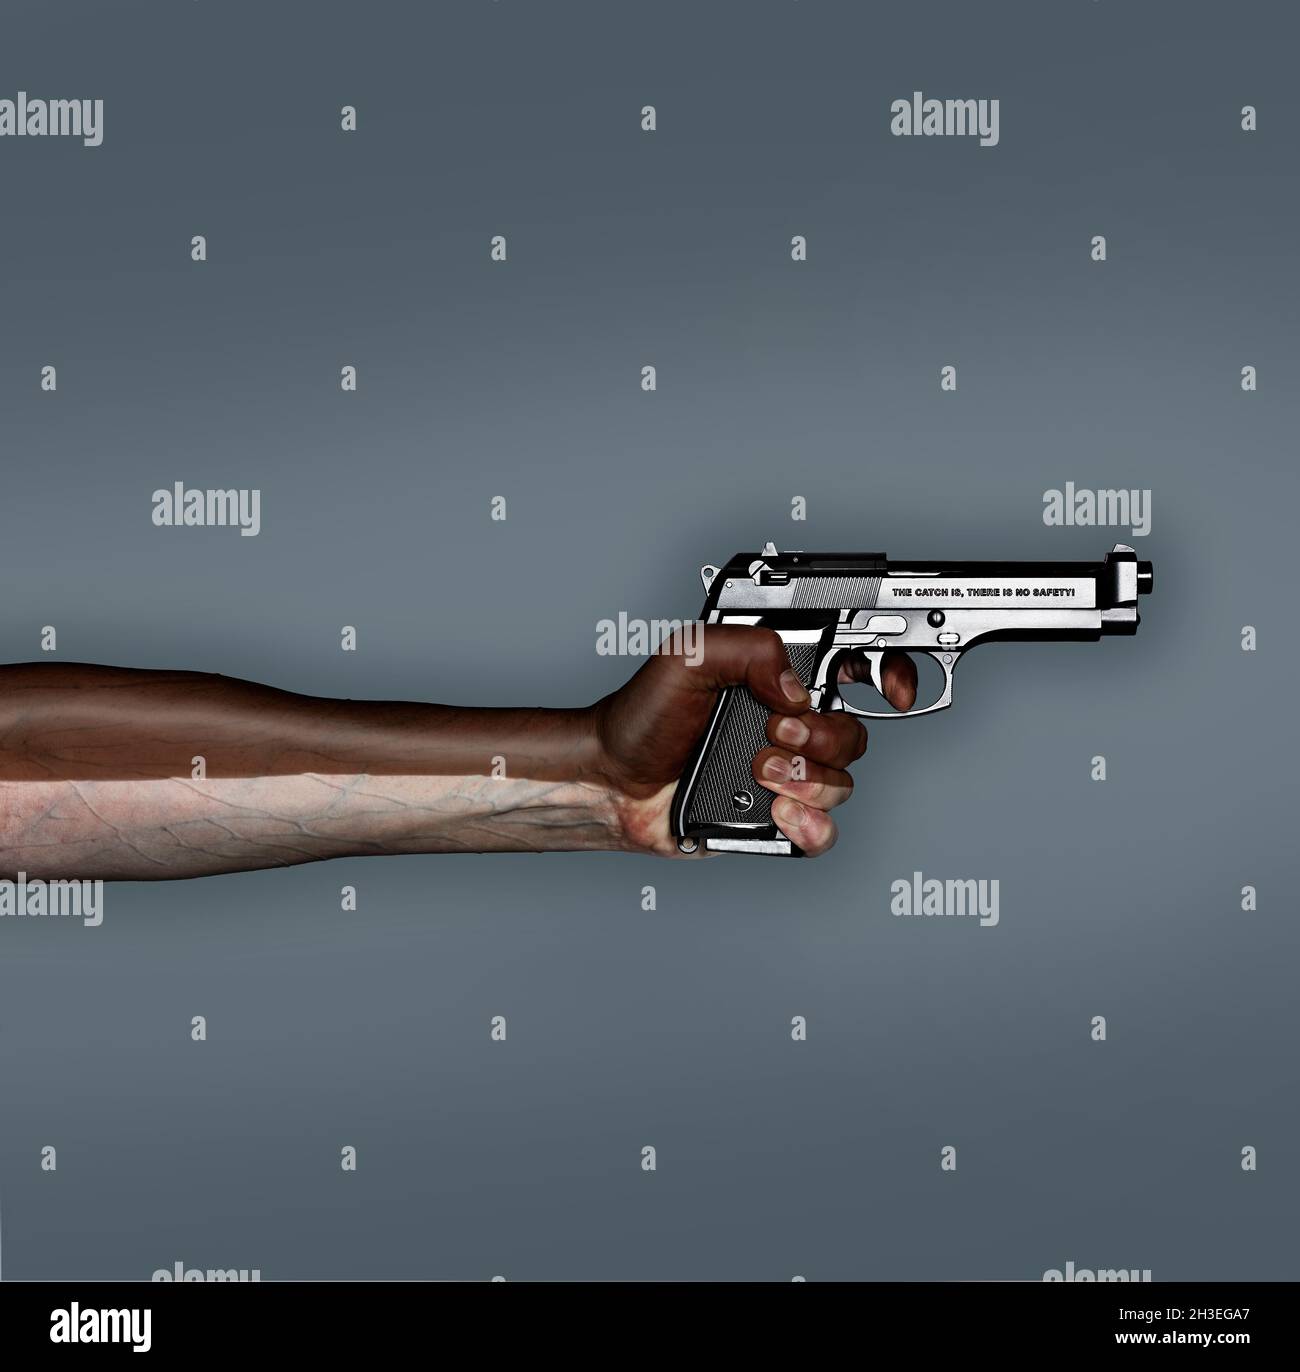 Mixed skin colour arm and hand gripping a pistol very hard causing tension in the arm and protruding veins, symbolising racial tension or harmony. Stock Photo